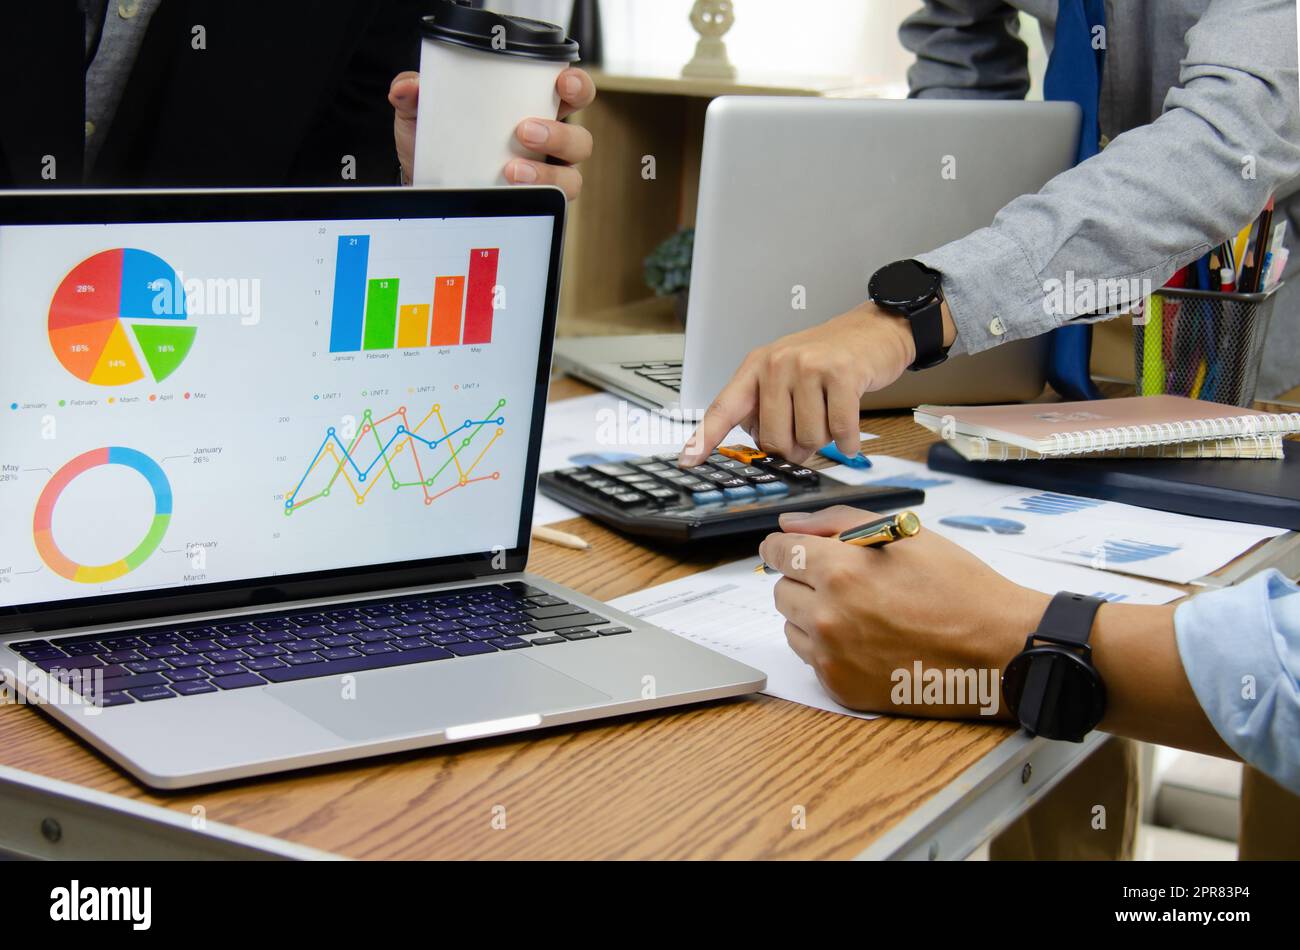 Business people meeting at the office by analyzing data from financial graphs and investment charts to plan a marketing team. Stock Photo